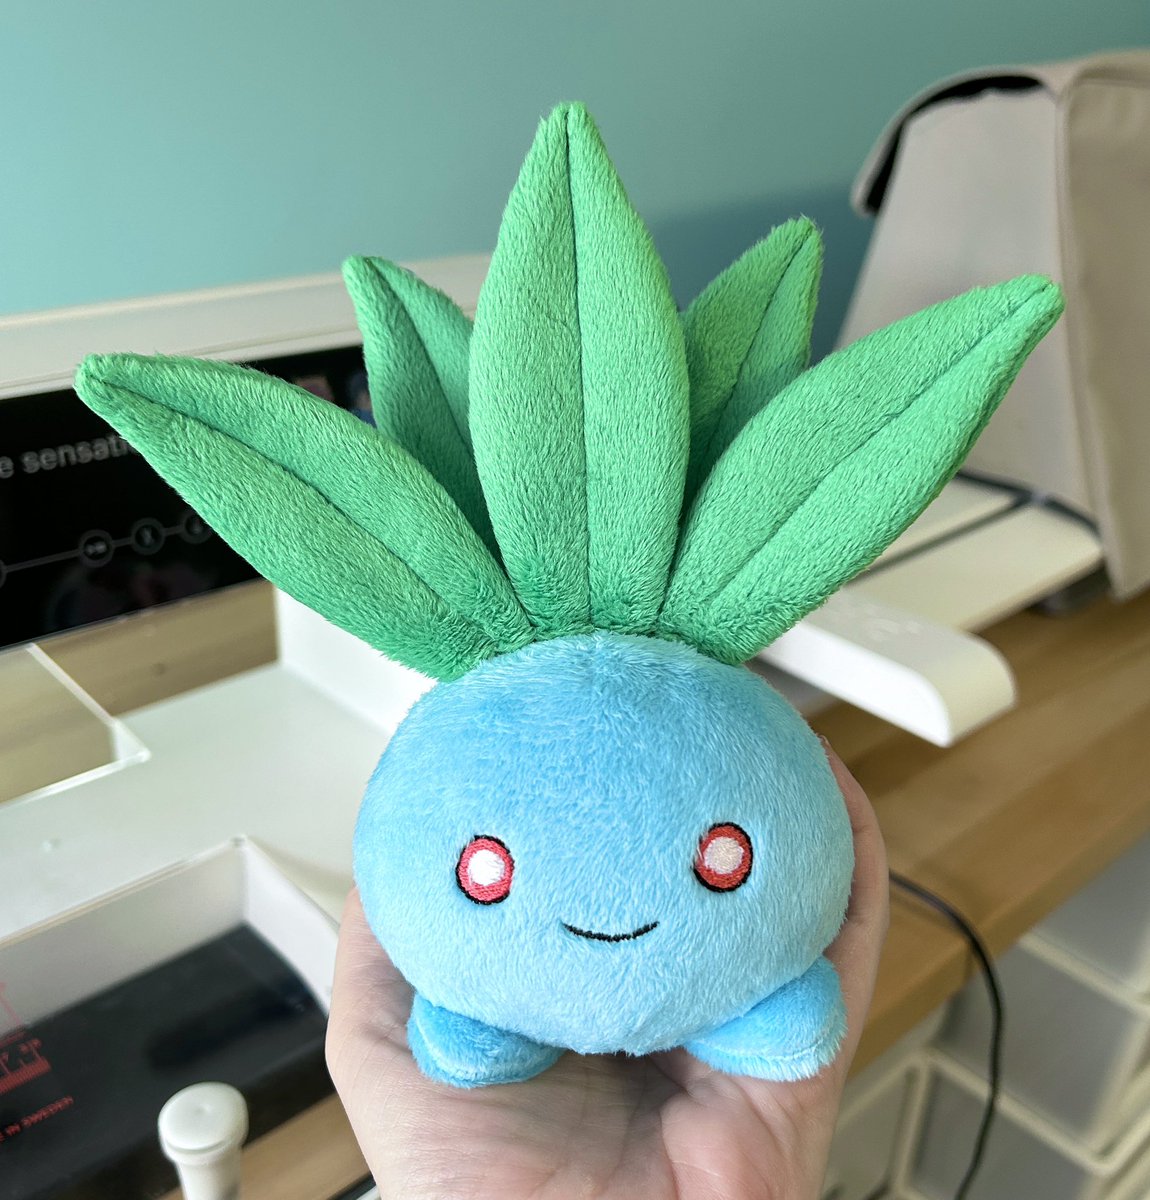 Alternate color weighted mini Oddish shop order ready for his new home! 😊